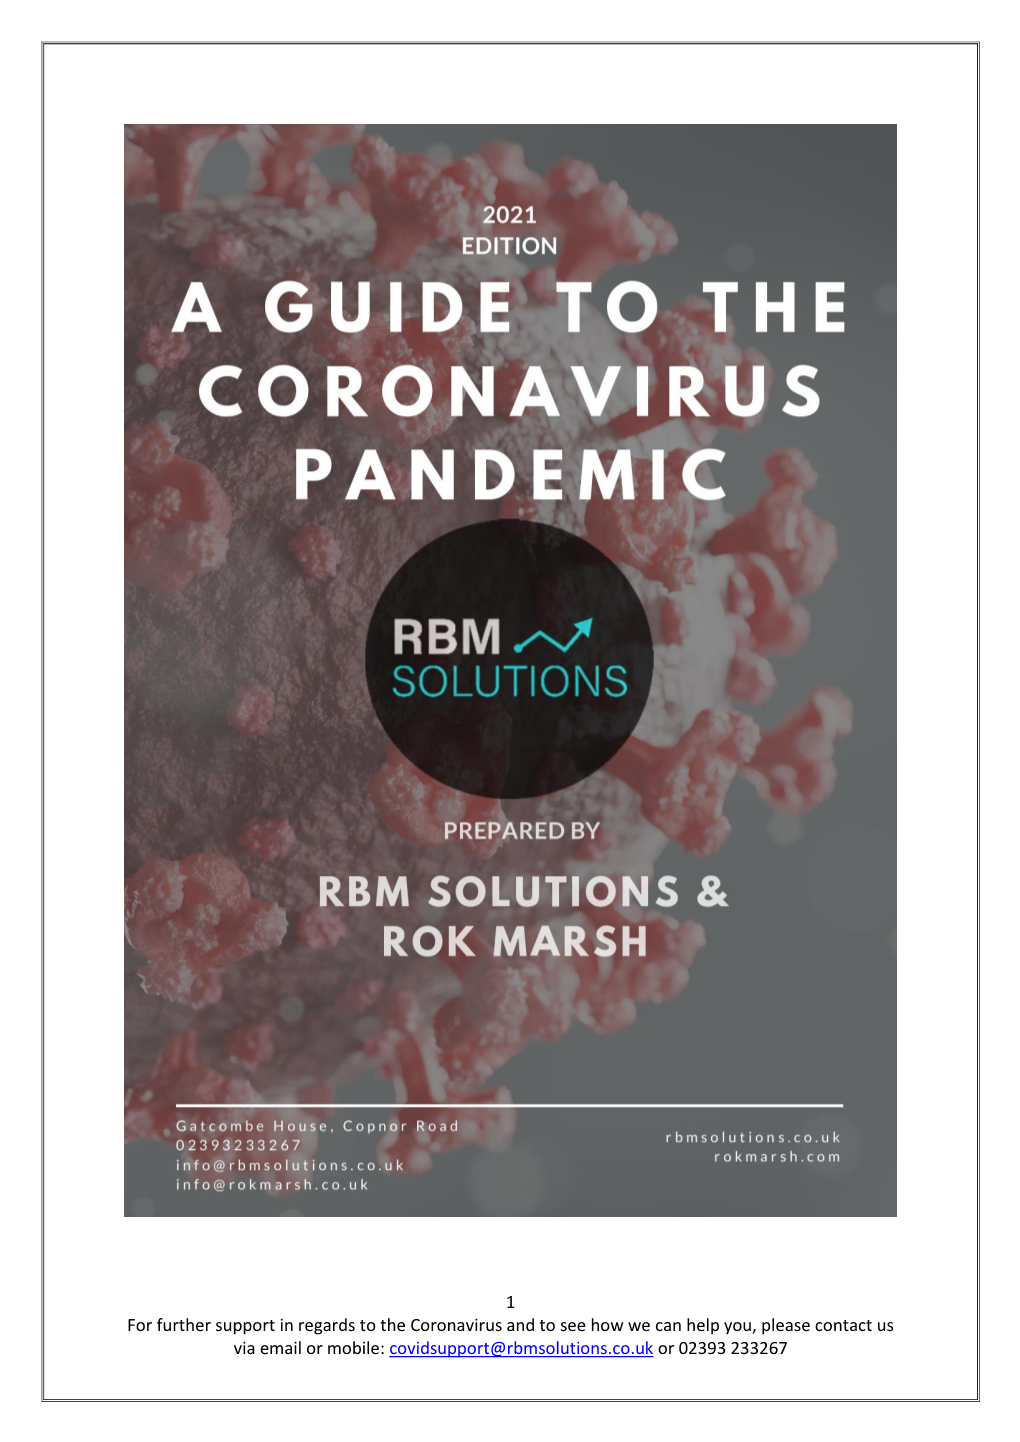 1 for Further Support in Regards to the Coronavirus and To